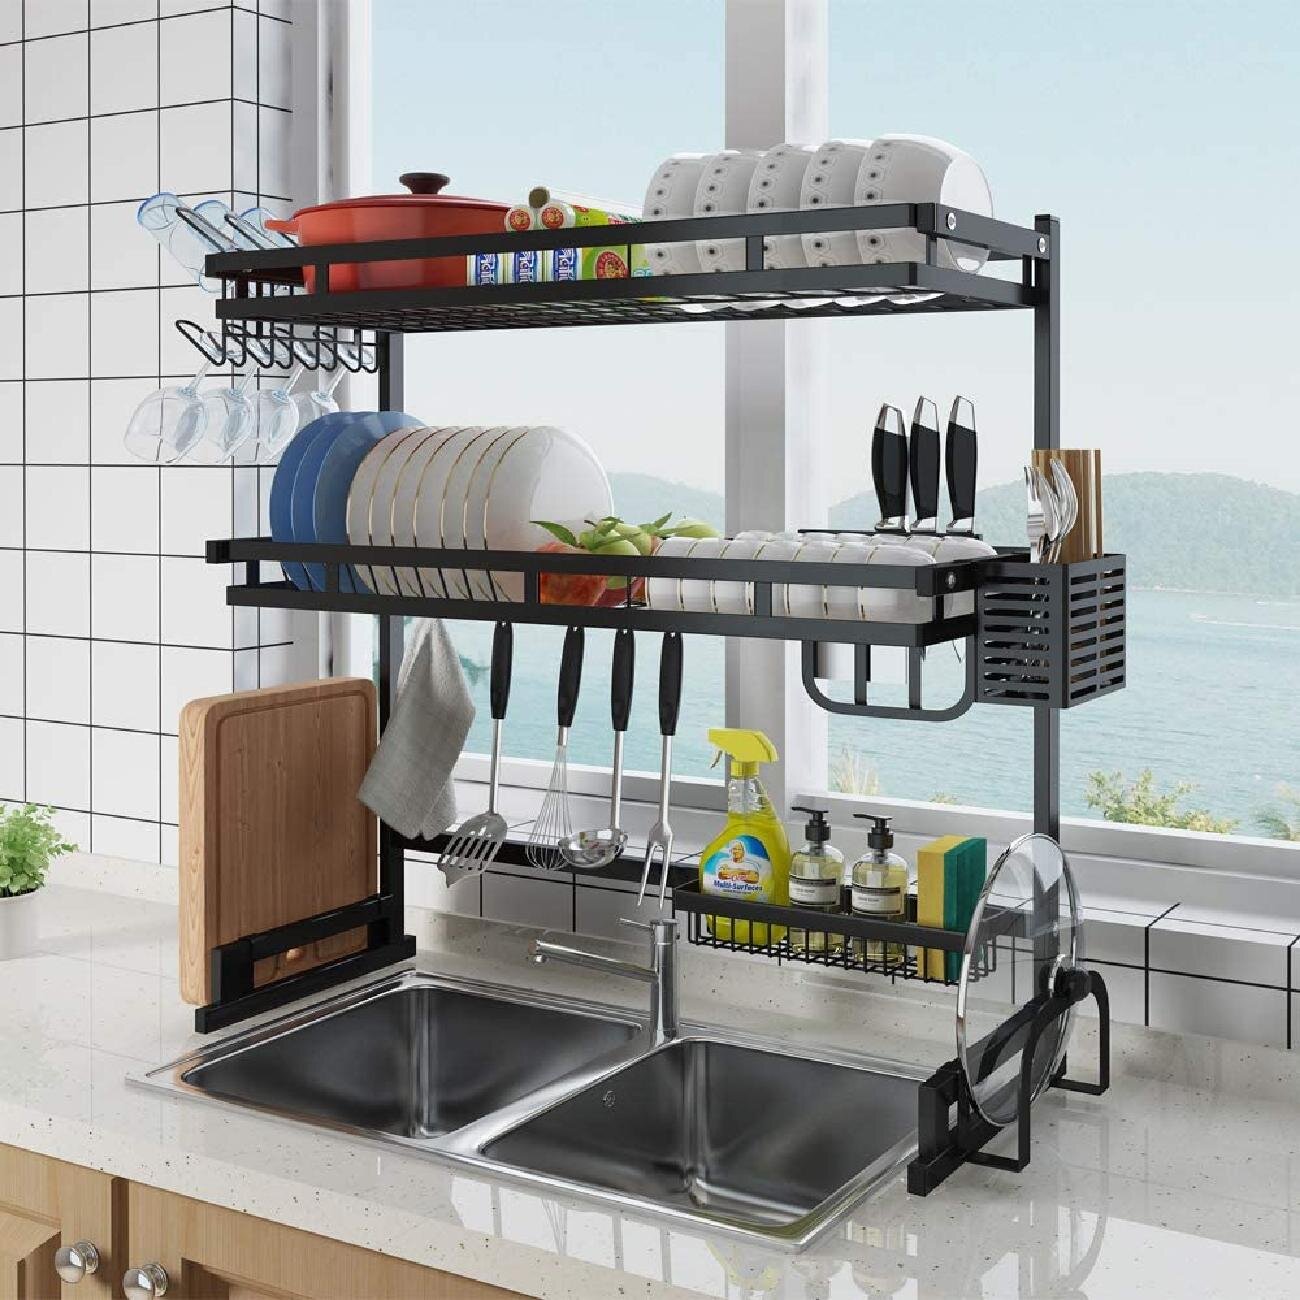 Over Sink Dish Drying Rack Stainless Steel Drainer Kitchen Cutlery Holder Shelf 